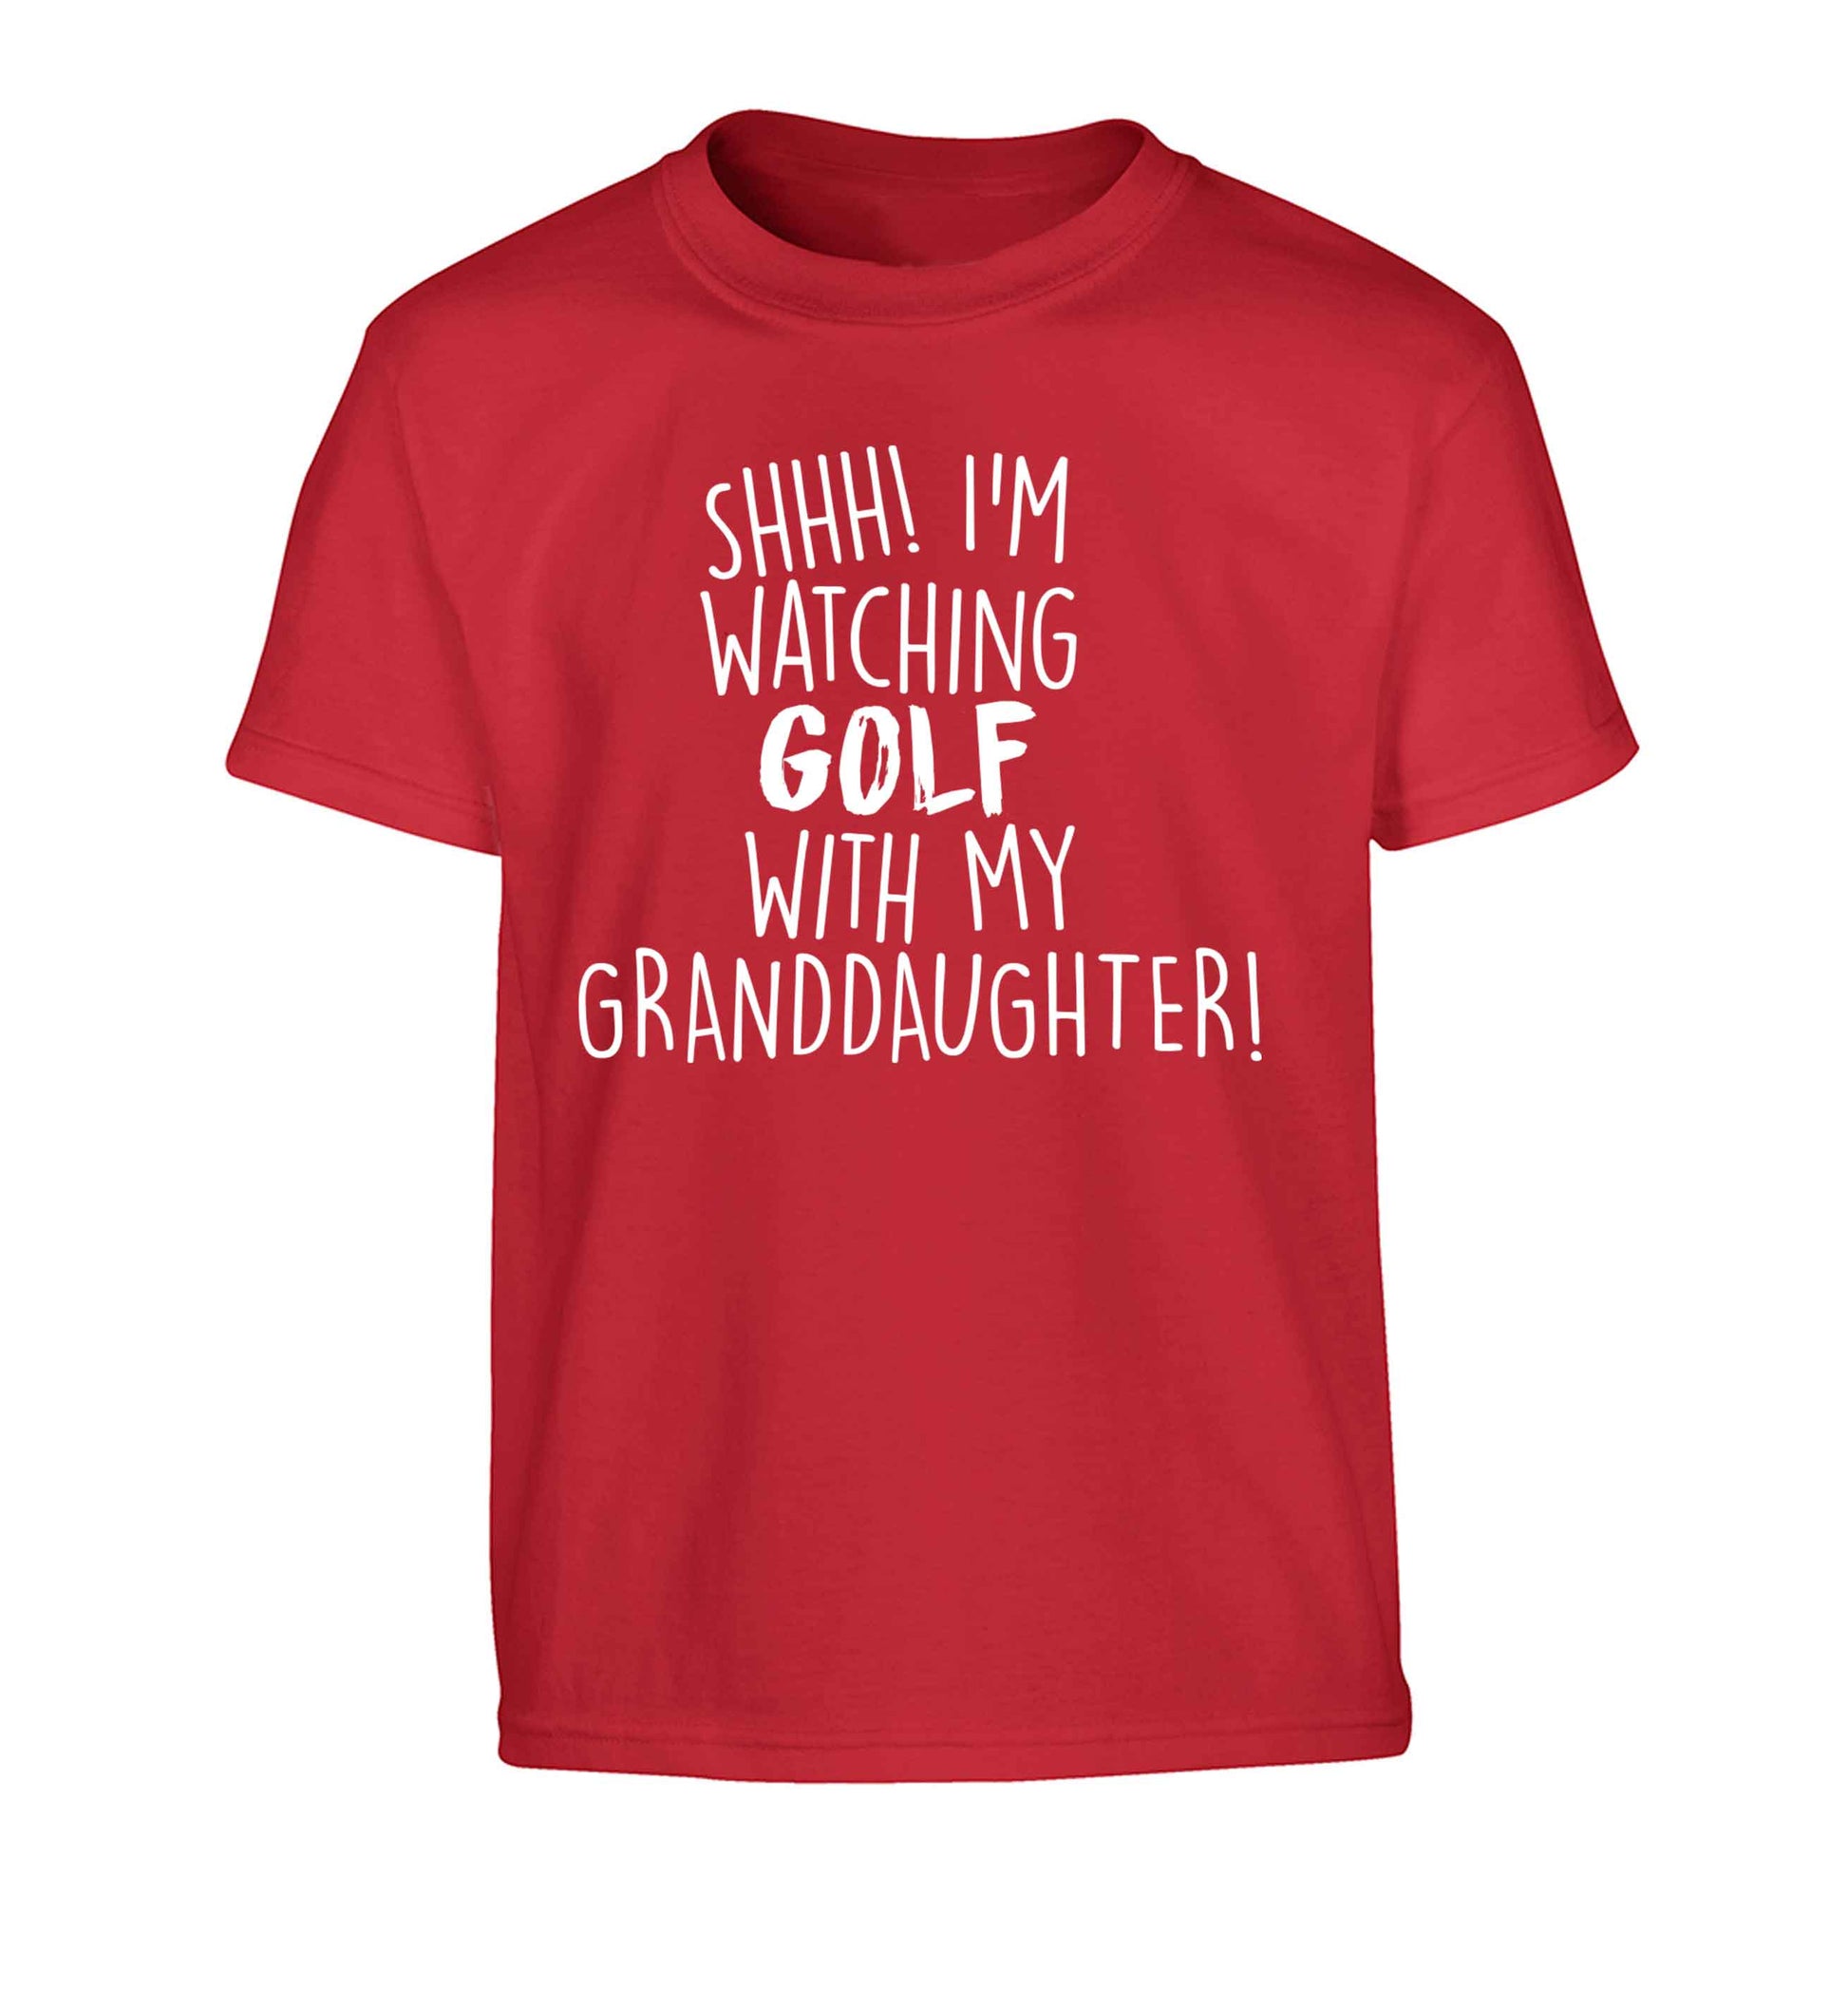 Shh I'm watching golf with my granddaughter Children's red Tshirt 12-13 Years